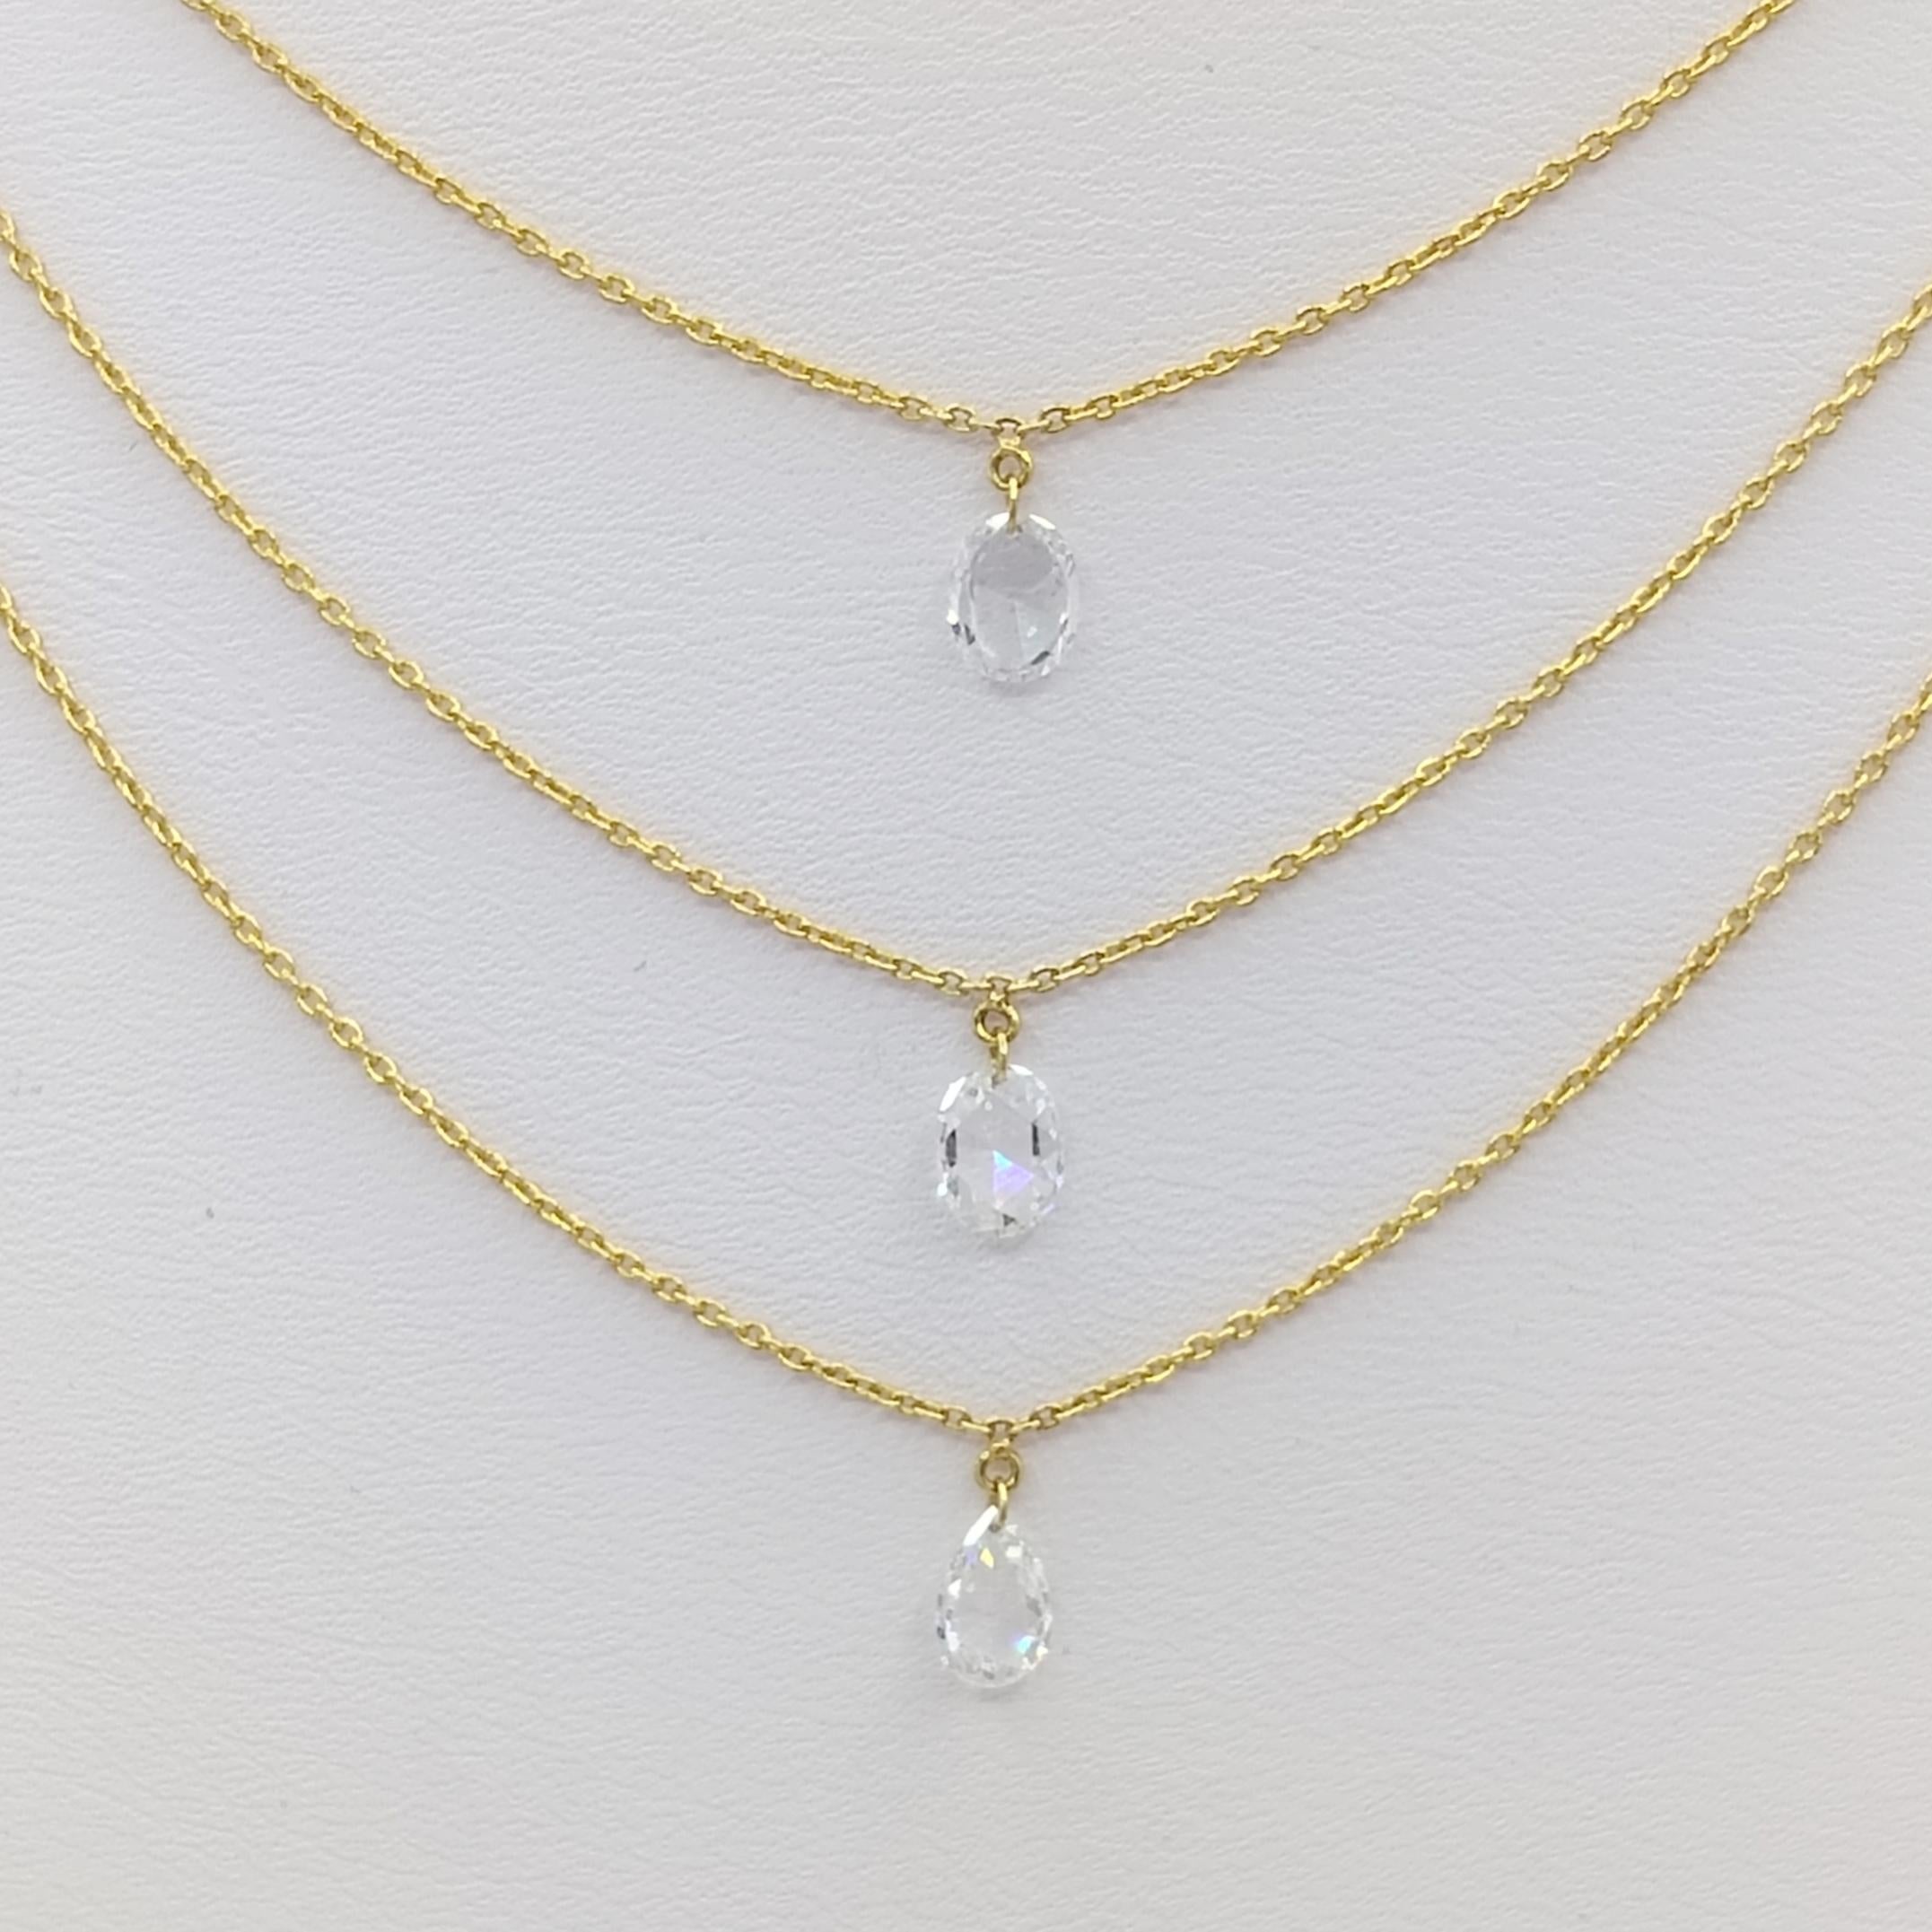 Women's or Men's White Diamond 3 Layer Rose Cut Diamond Necklace in 18K Yellow Gold For Sale